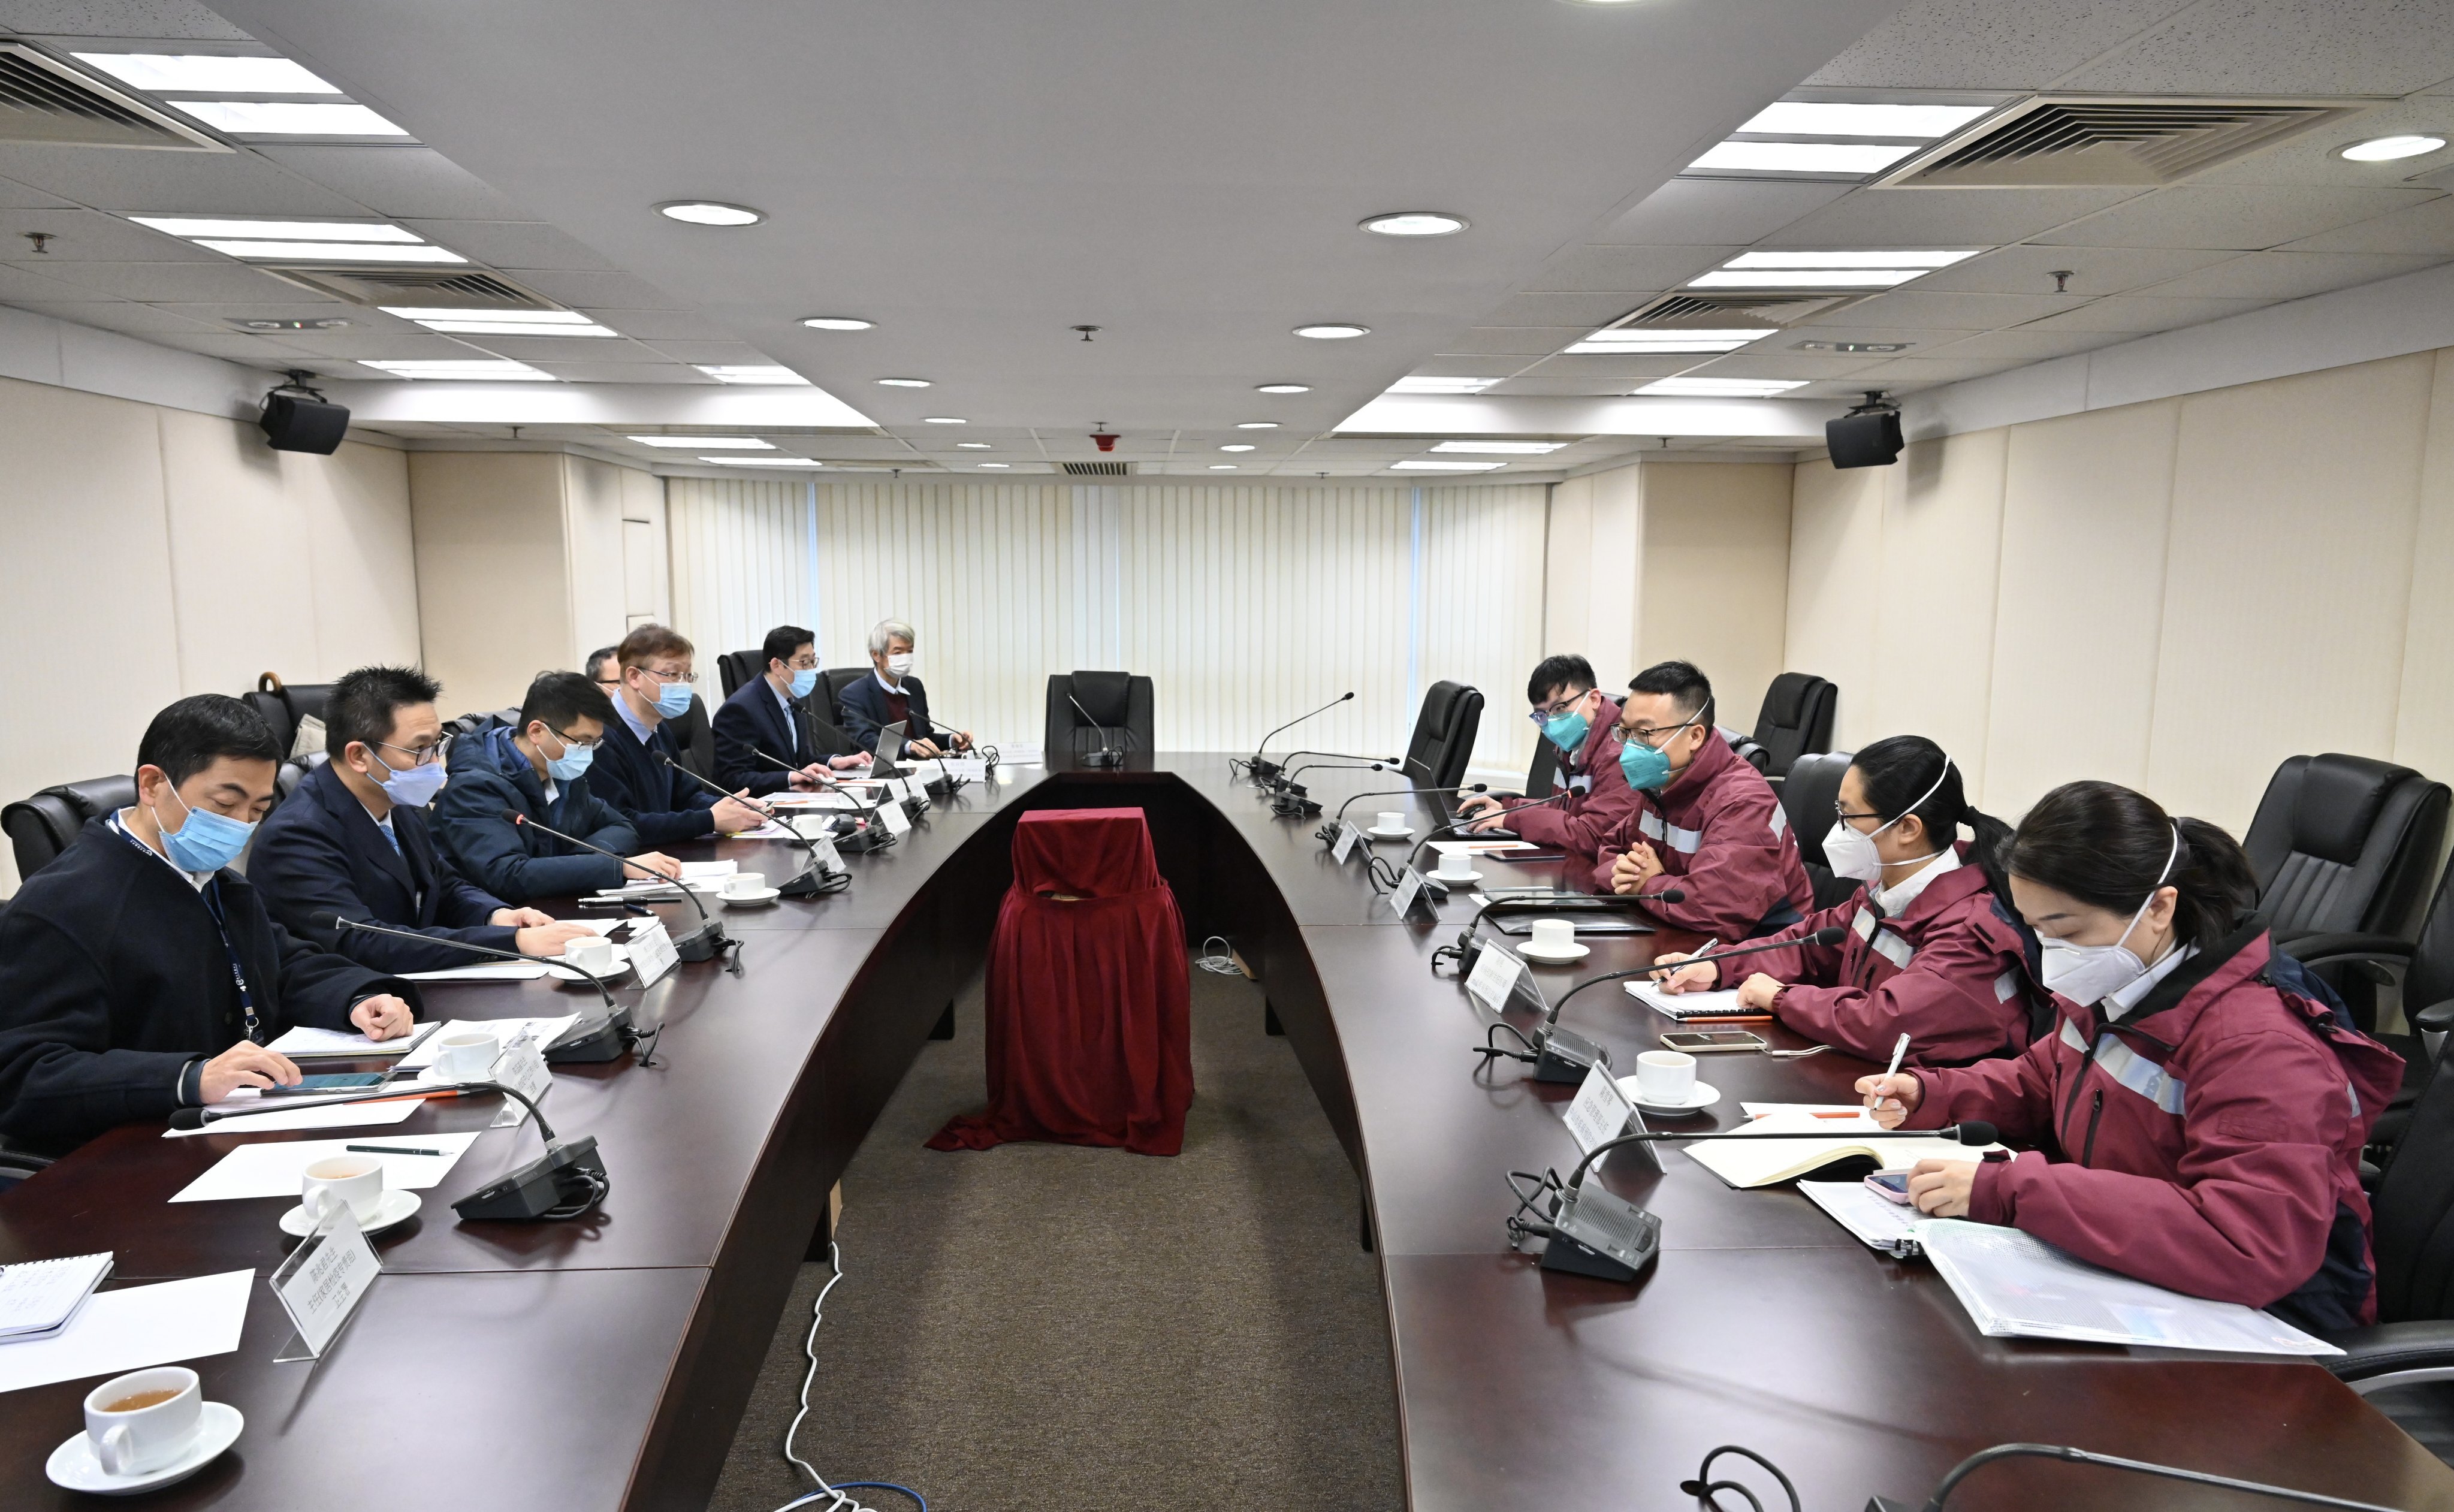 Mainland epidemiological experts exchange views with Hong Kong government officials in a meeting on February 20. A team of mainland China’s top epidemiologists arrived in Hong Kong last week to inspect Hong Kong’s anti-pandemic arrangements and advise the local government. Photo: Xinhua